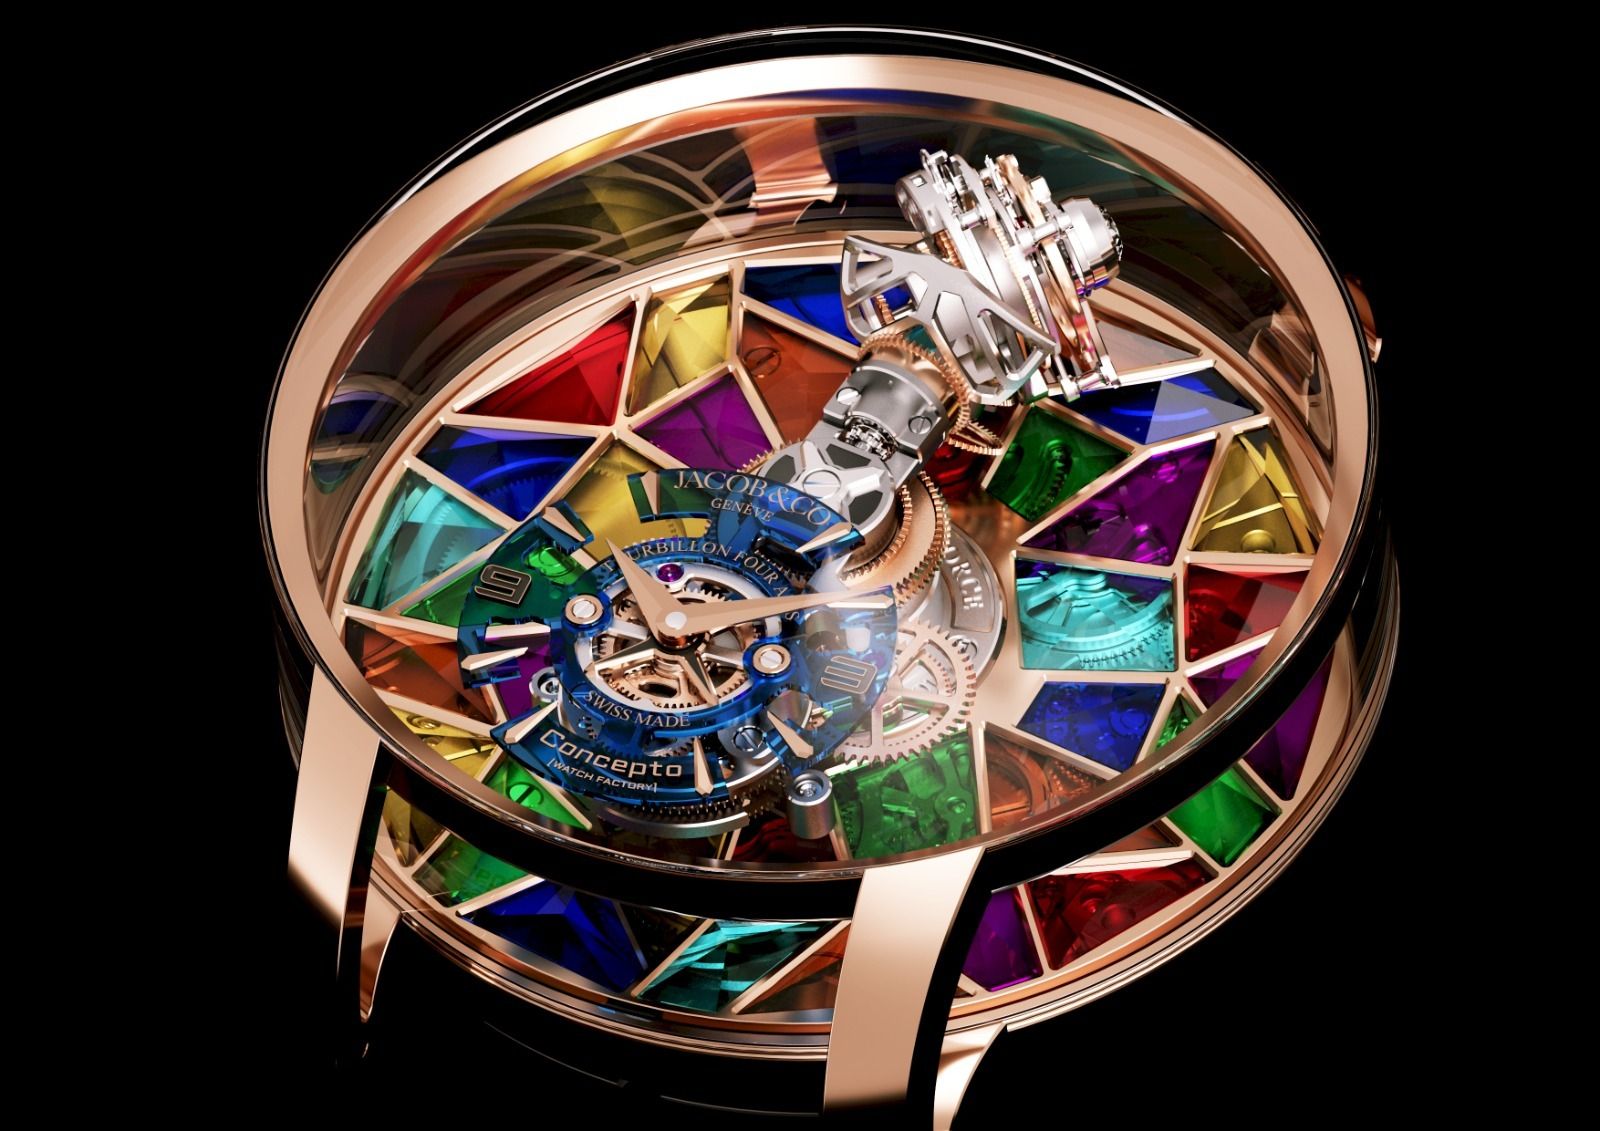 Jacob & Co. X Concepto Watch Factory: The Astronomia Revolution 4th Dimension
